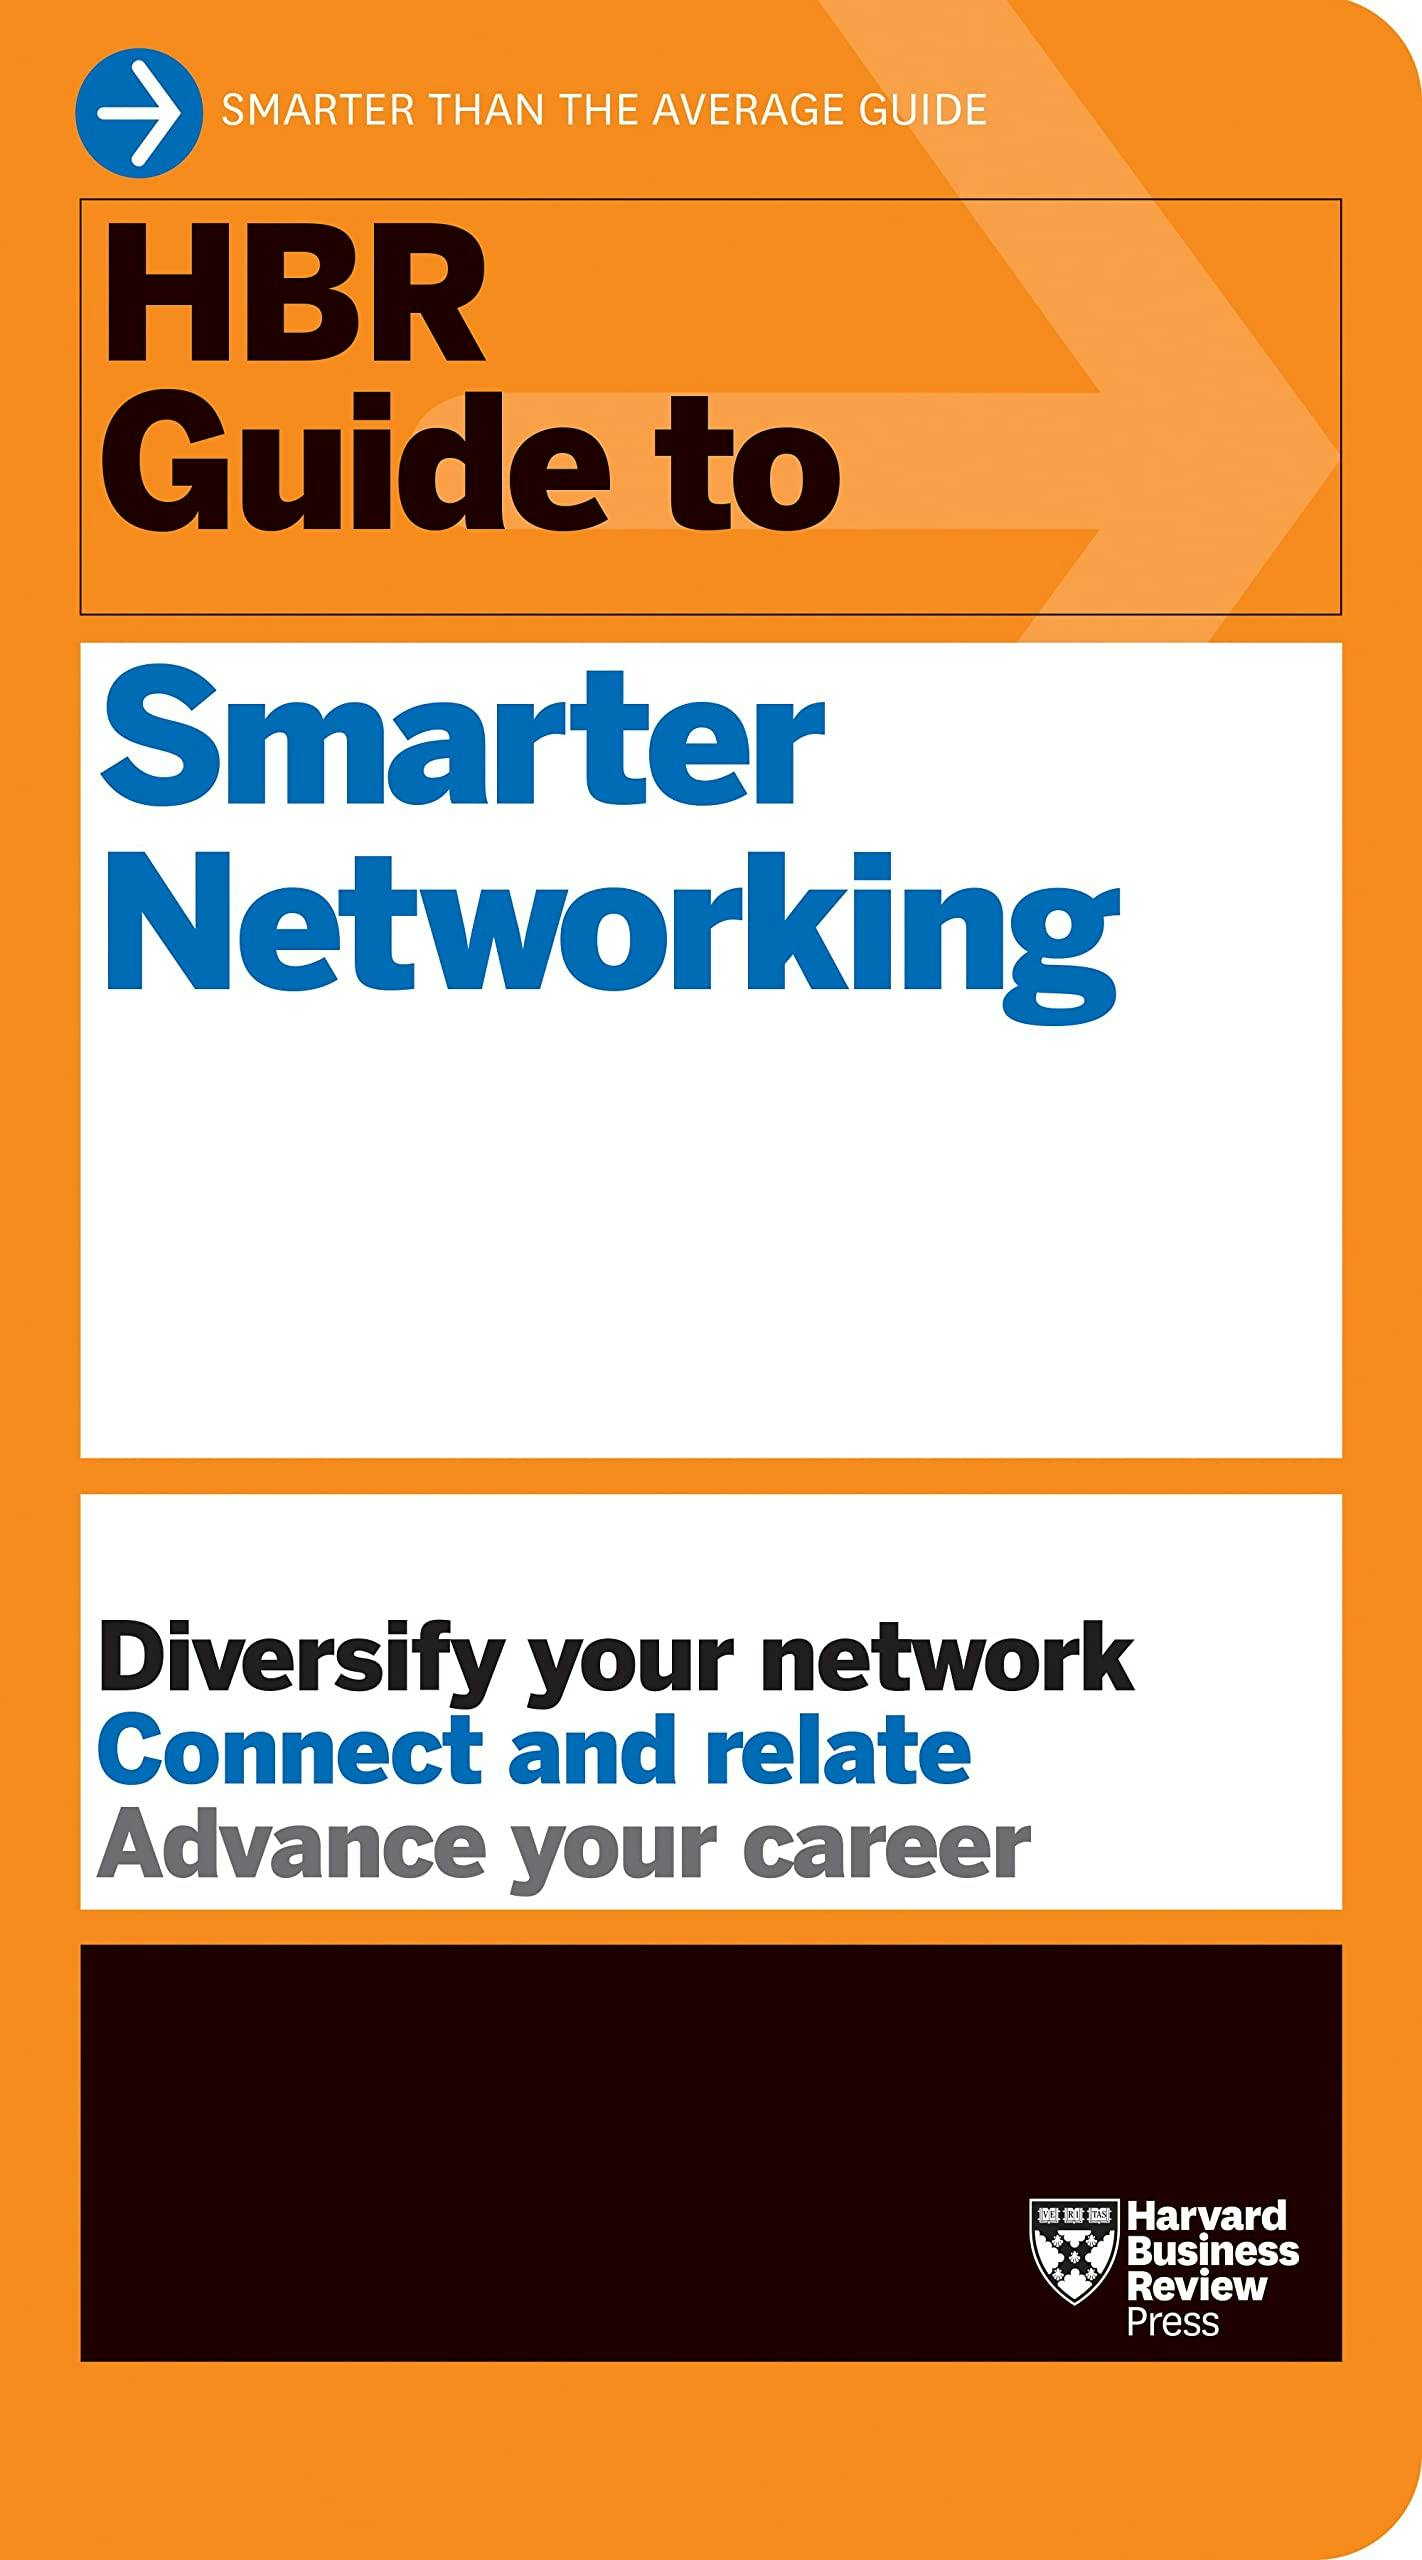 HBR Networking Book